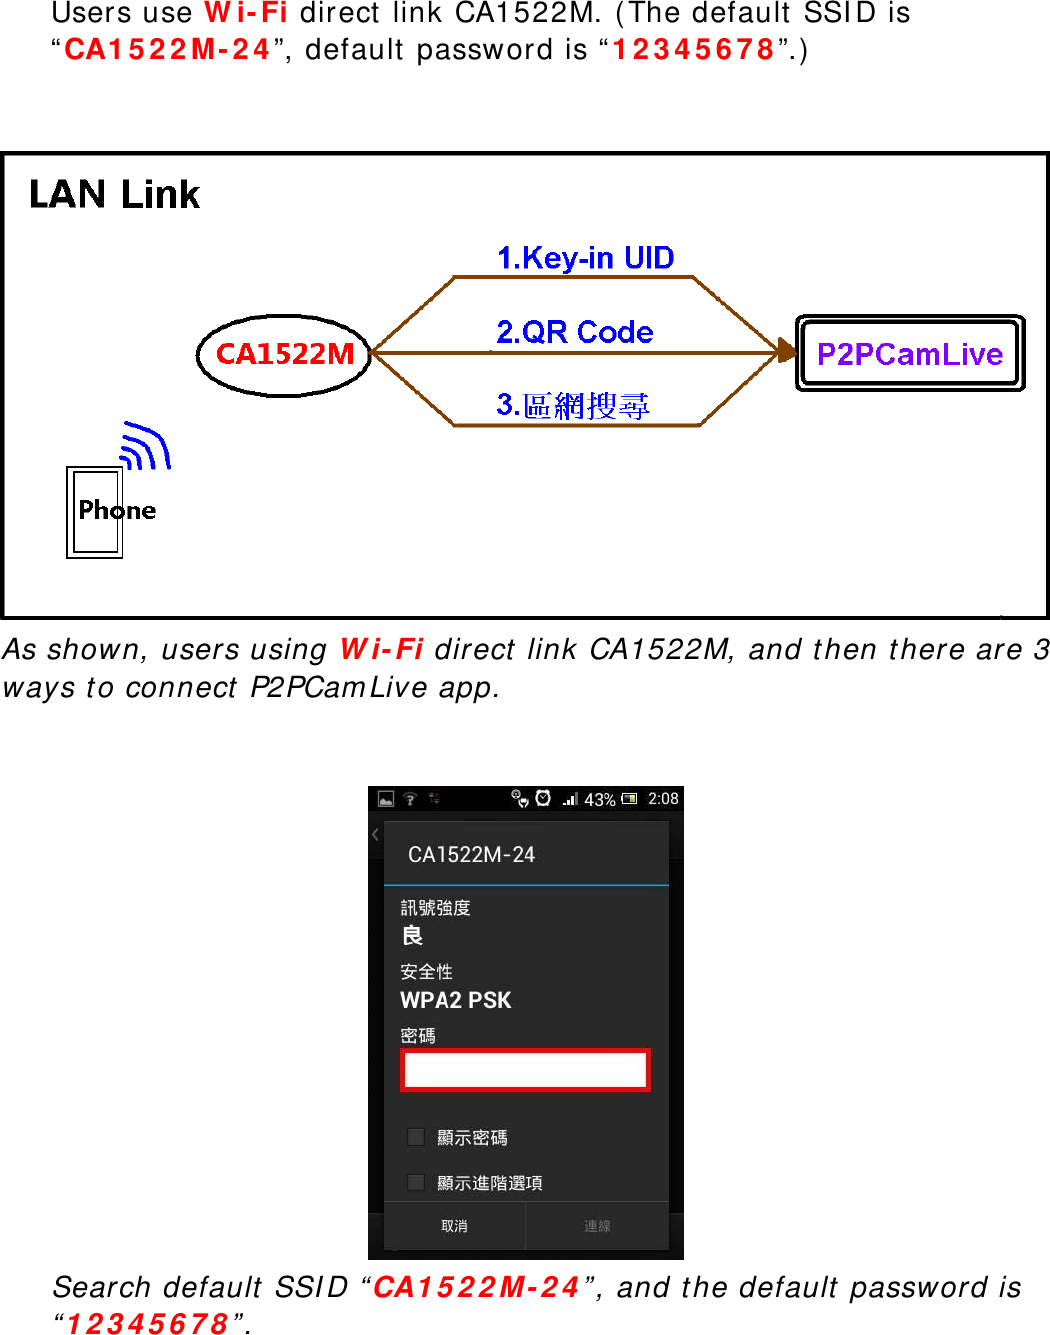  Users use Wi-Fi direct link CA1522M. (The default SSID is “CA1522M-24”, default password is “12345678”.)    As shown, users using Wi-Fi direct link CA1522M, and then there are 3 ways to connect P2PCamLive app.    Search default SSID “CA1522M-24”, and the default password is “12345678”.    